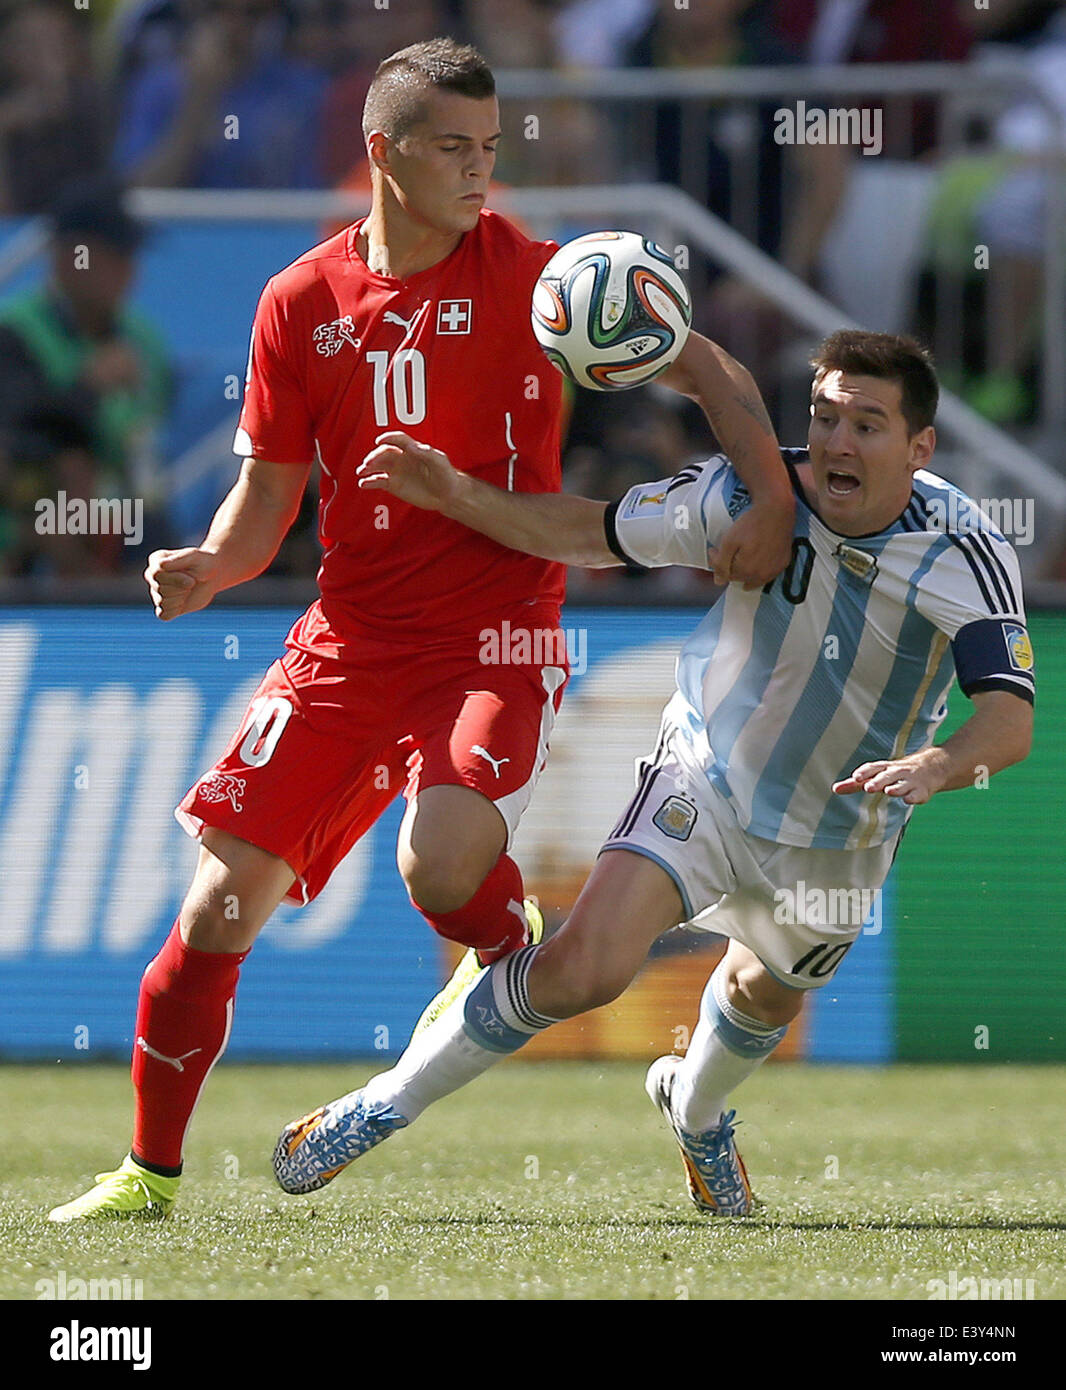 Sao Paulo, Brazil. 1st July, 2014. Switzerland's Granit Xhaka (L) vies with Argentina's Lionel Messi during a Round of 16 match between Argentina and Switzerland of 2014 FIFA World Cup at the Arena de Sao Paulo Stadium in Sao Paulo, Brazil, on July 1, 2014. Credit:  Wang Lili/Xinhua/Alamy Live News Stock Photo